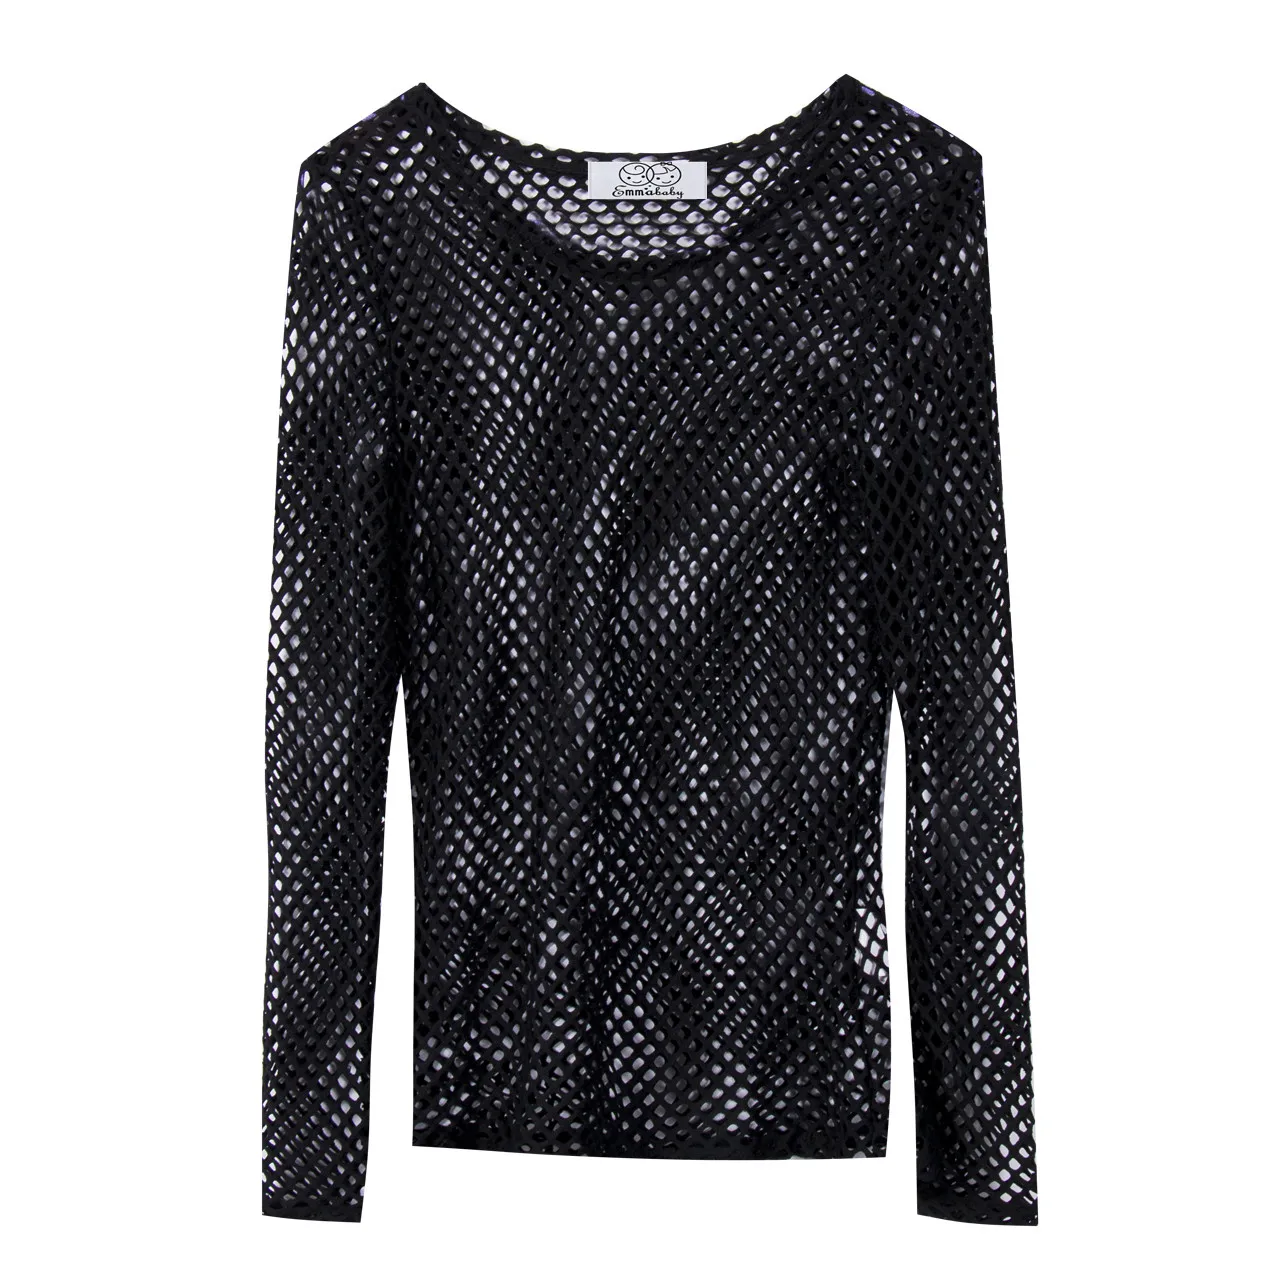 Women Sexy Clothes Fishnet Sheer T-shirt Long Sleeve Clothing Summer Fashion Mesh Tops Loose T-Shirt Women Pure Color Clothes